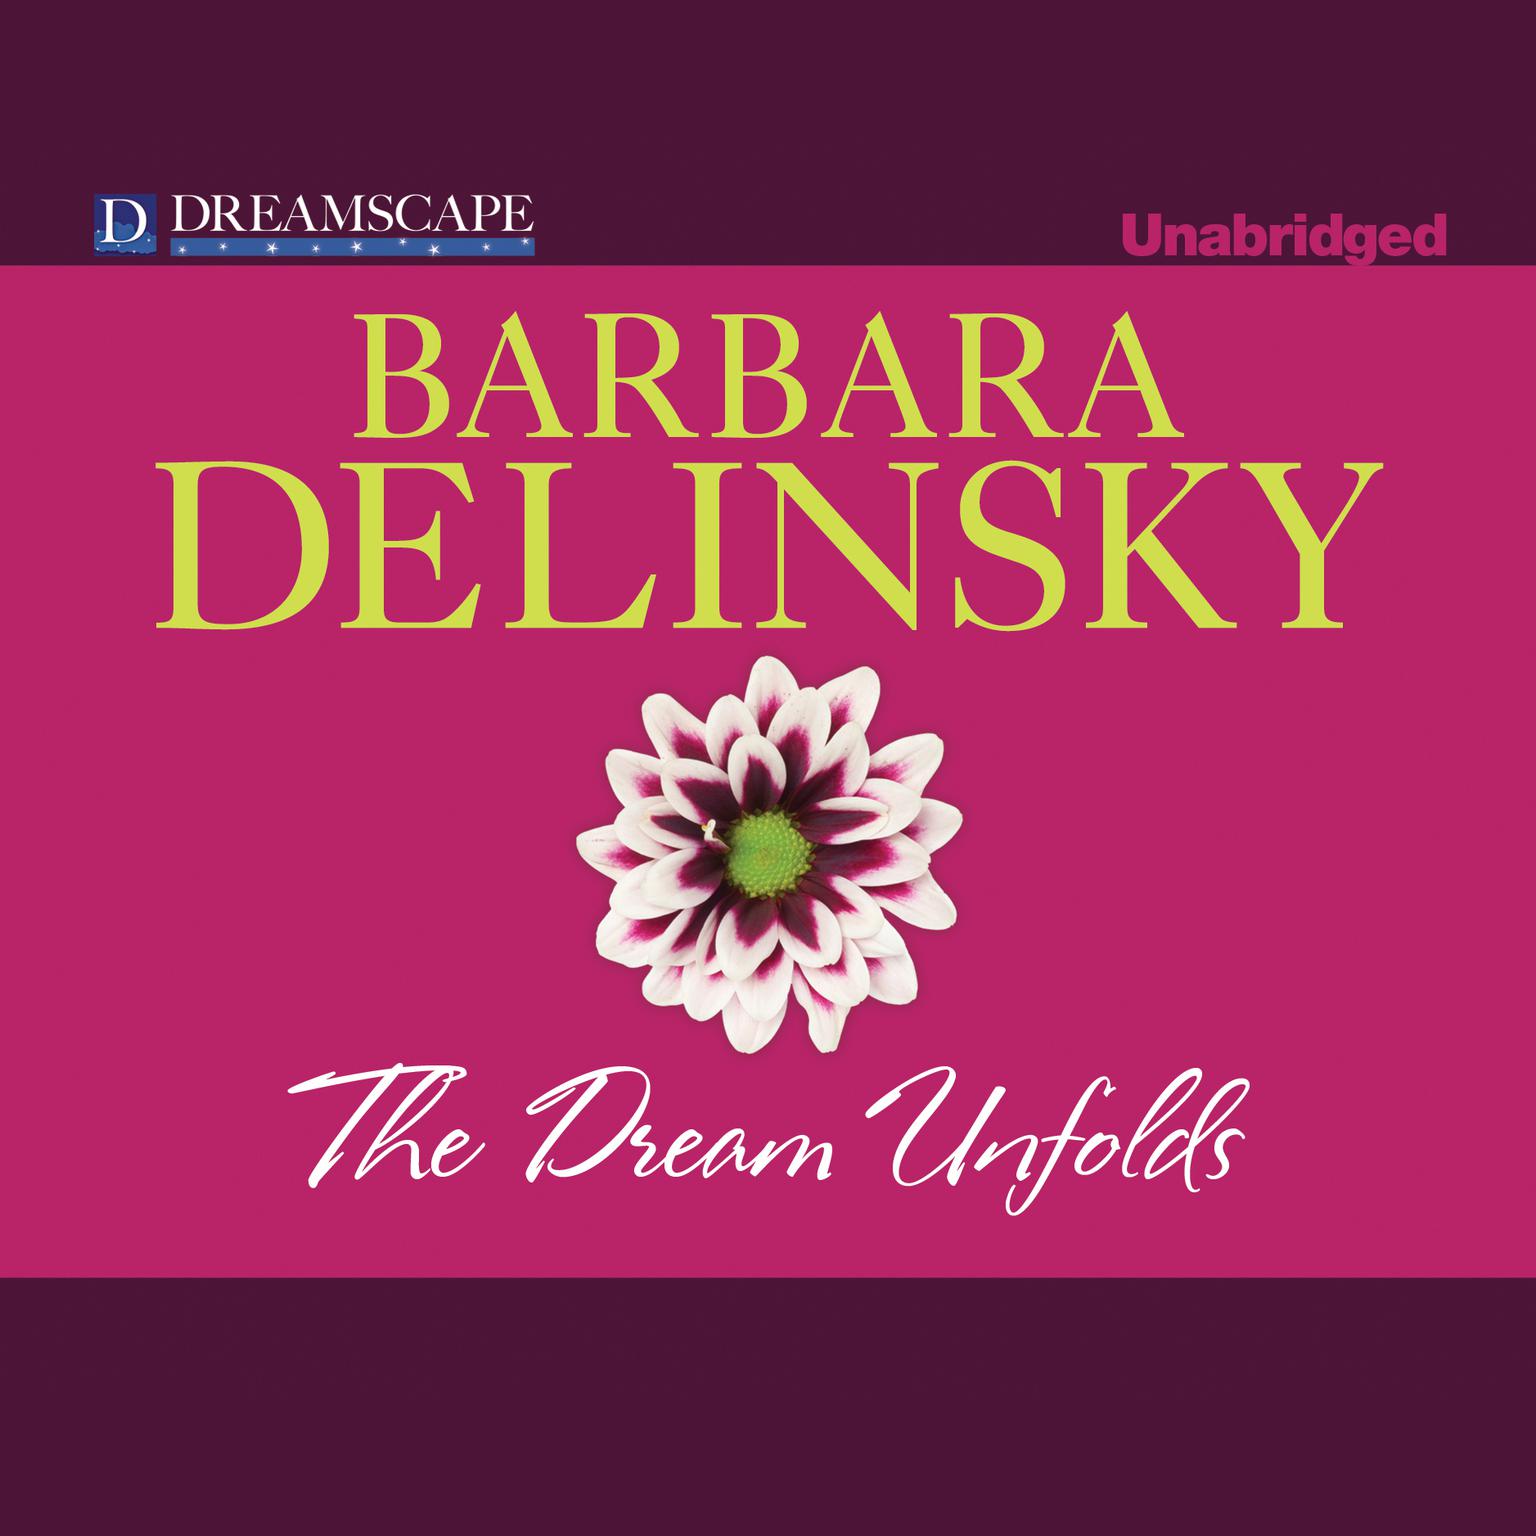 The Dream Unfolds Audiobook, by Barbara Delinsky